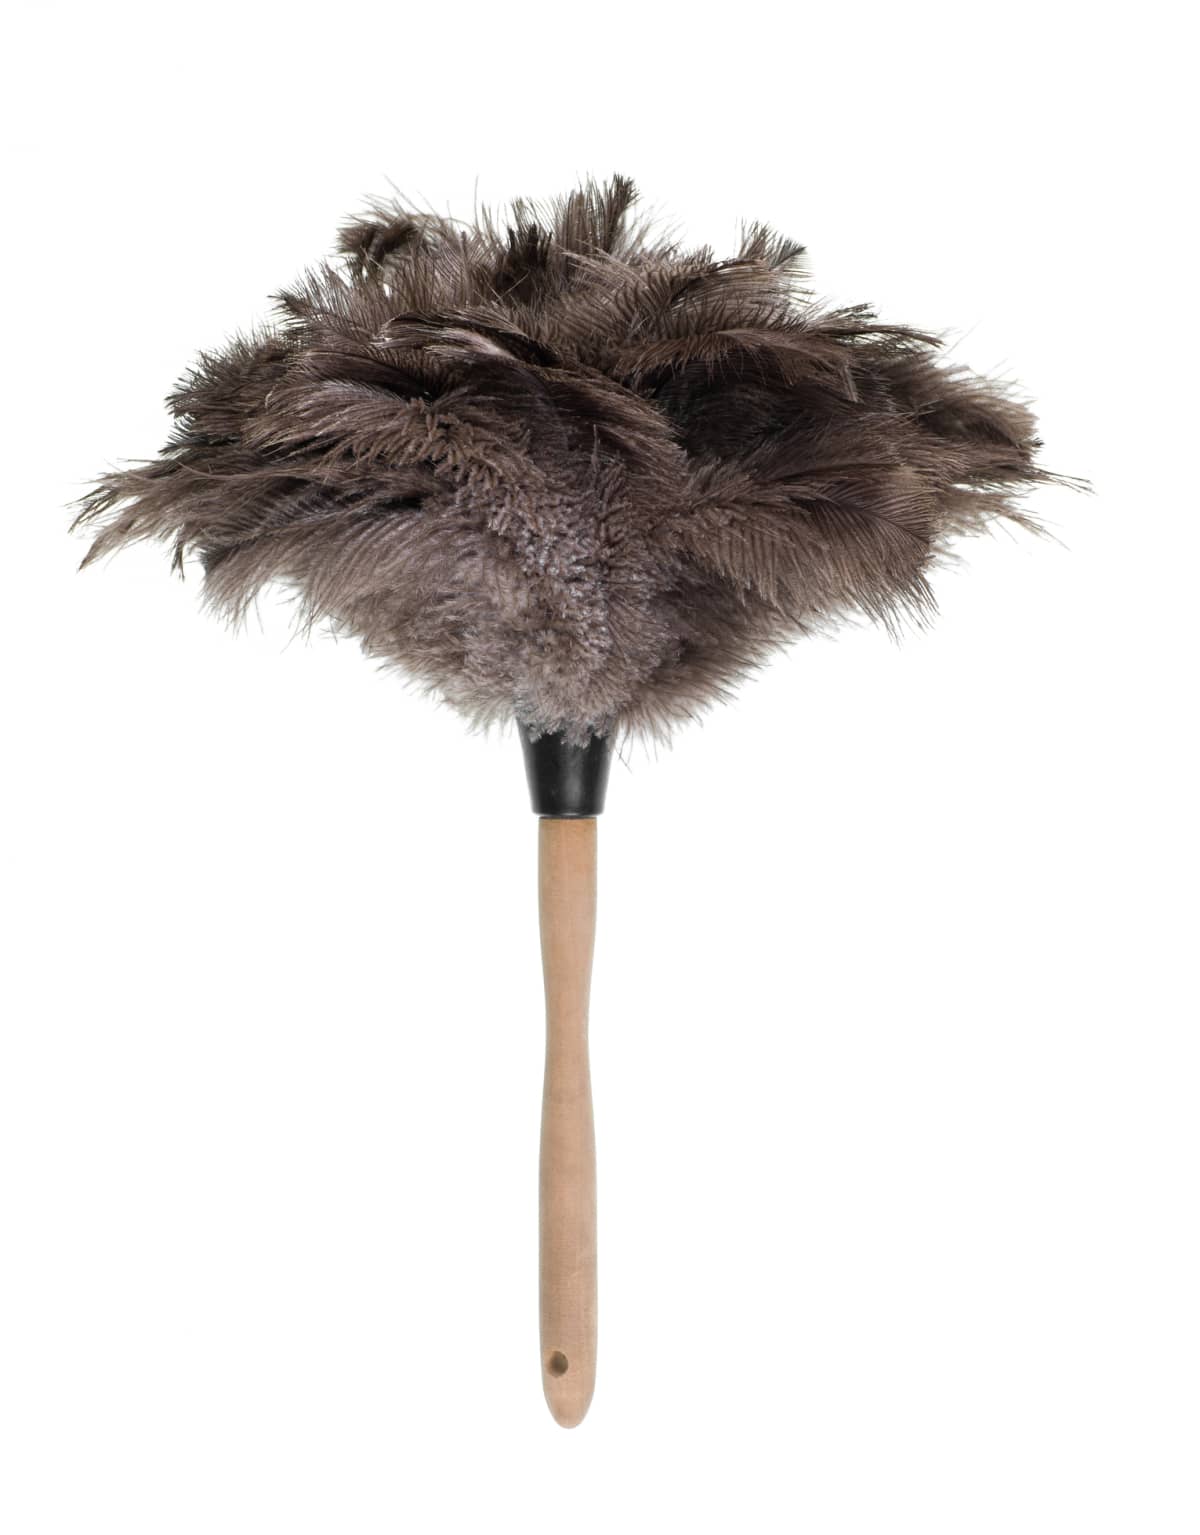 dust cleaner with feathers on white background